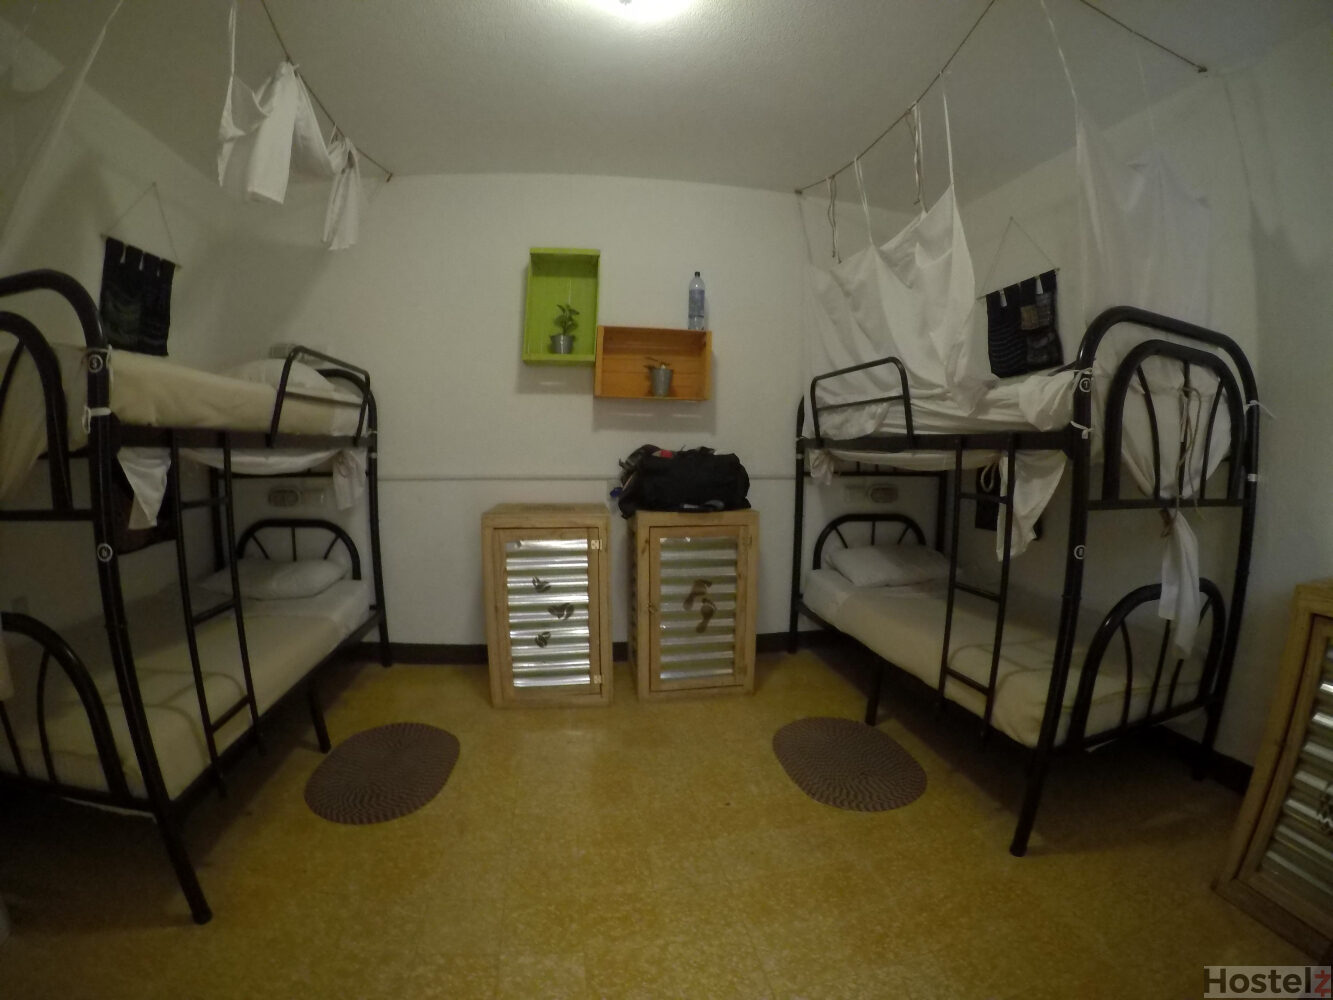 4-bed dorm room with lockers